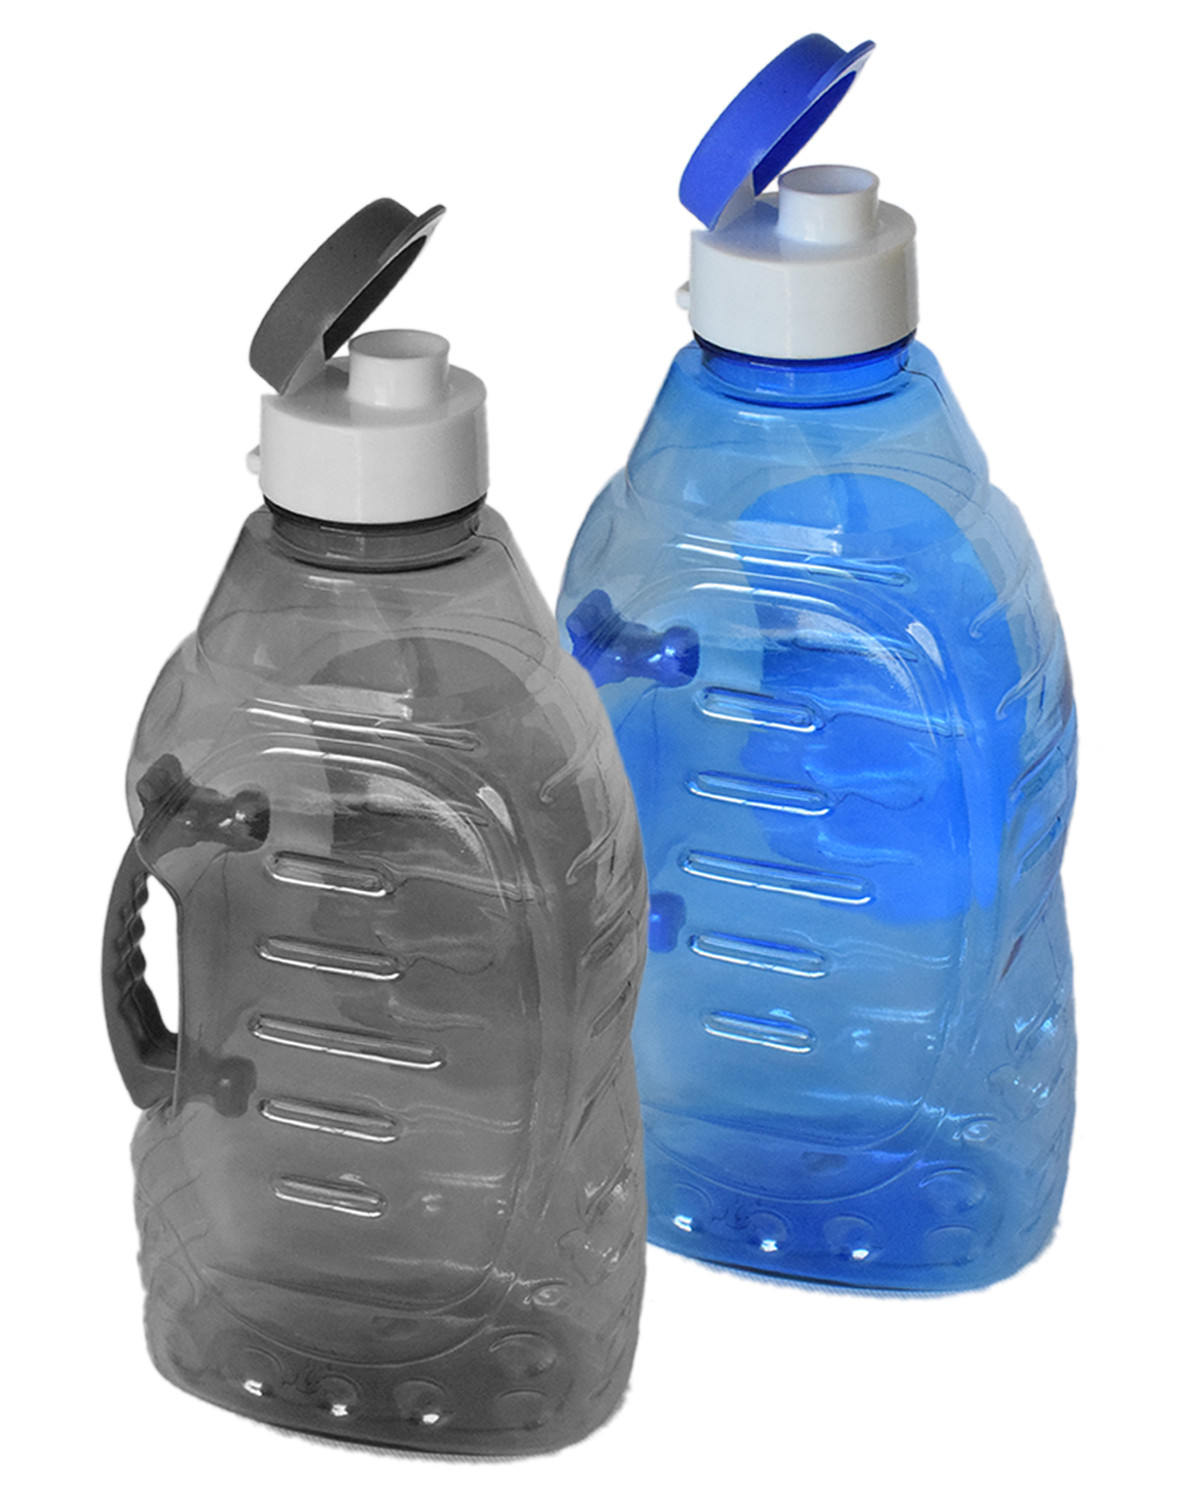 Kuber Industries Tranasparent Platic Water Bottle With Handle, 1500ml- Pack of 2 (Blue & Black)